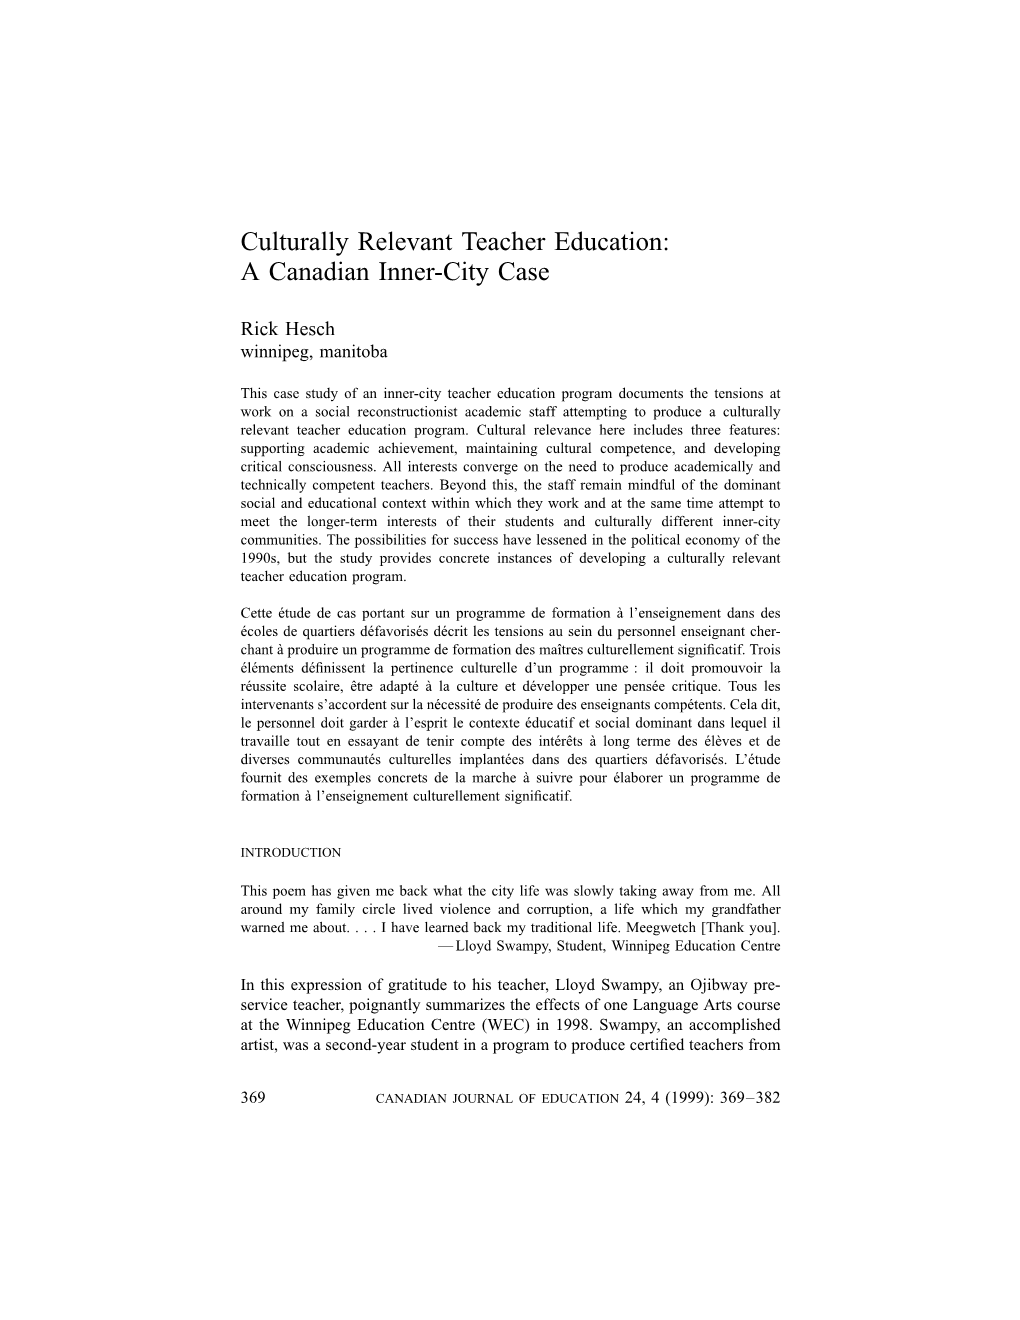 Culturally Relevant Teacher Education: a Canadian Inner-City Case